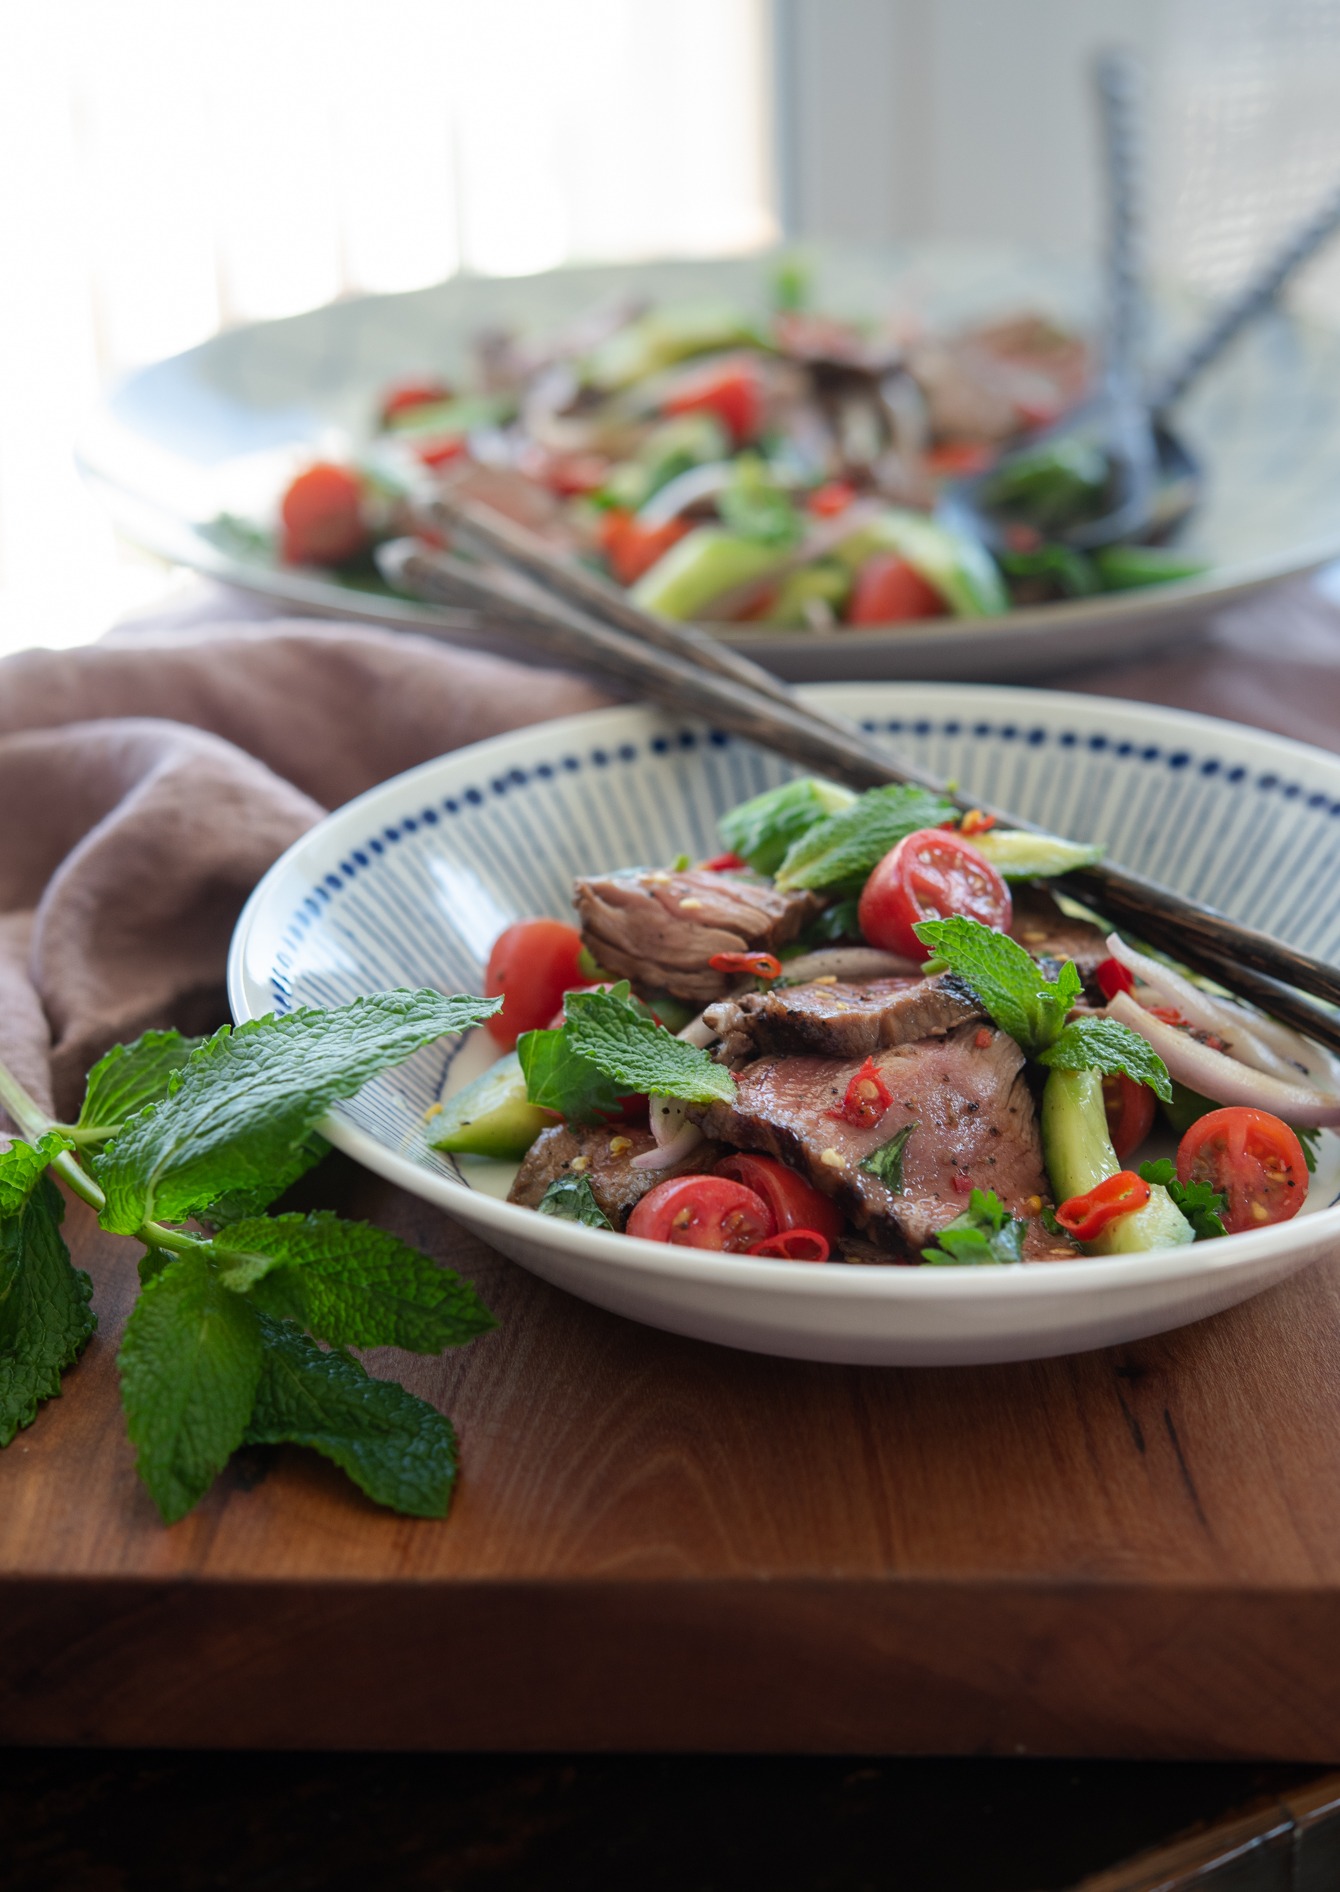 A plate of Thai beef salad (Yum Nua) garnished with mint leaves.